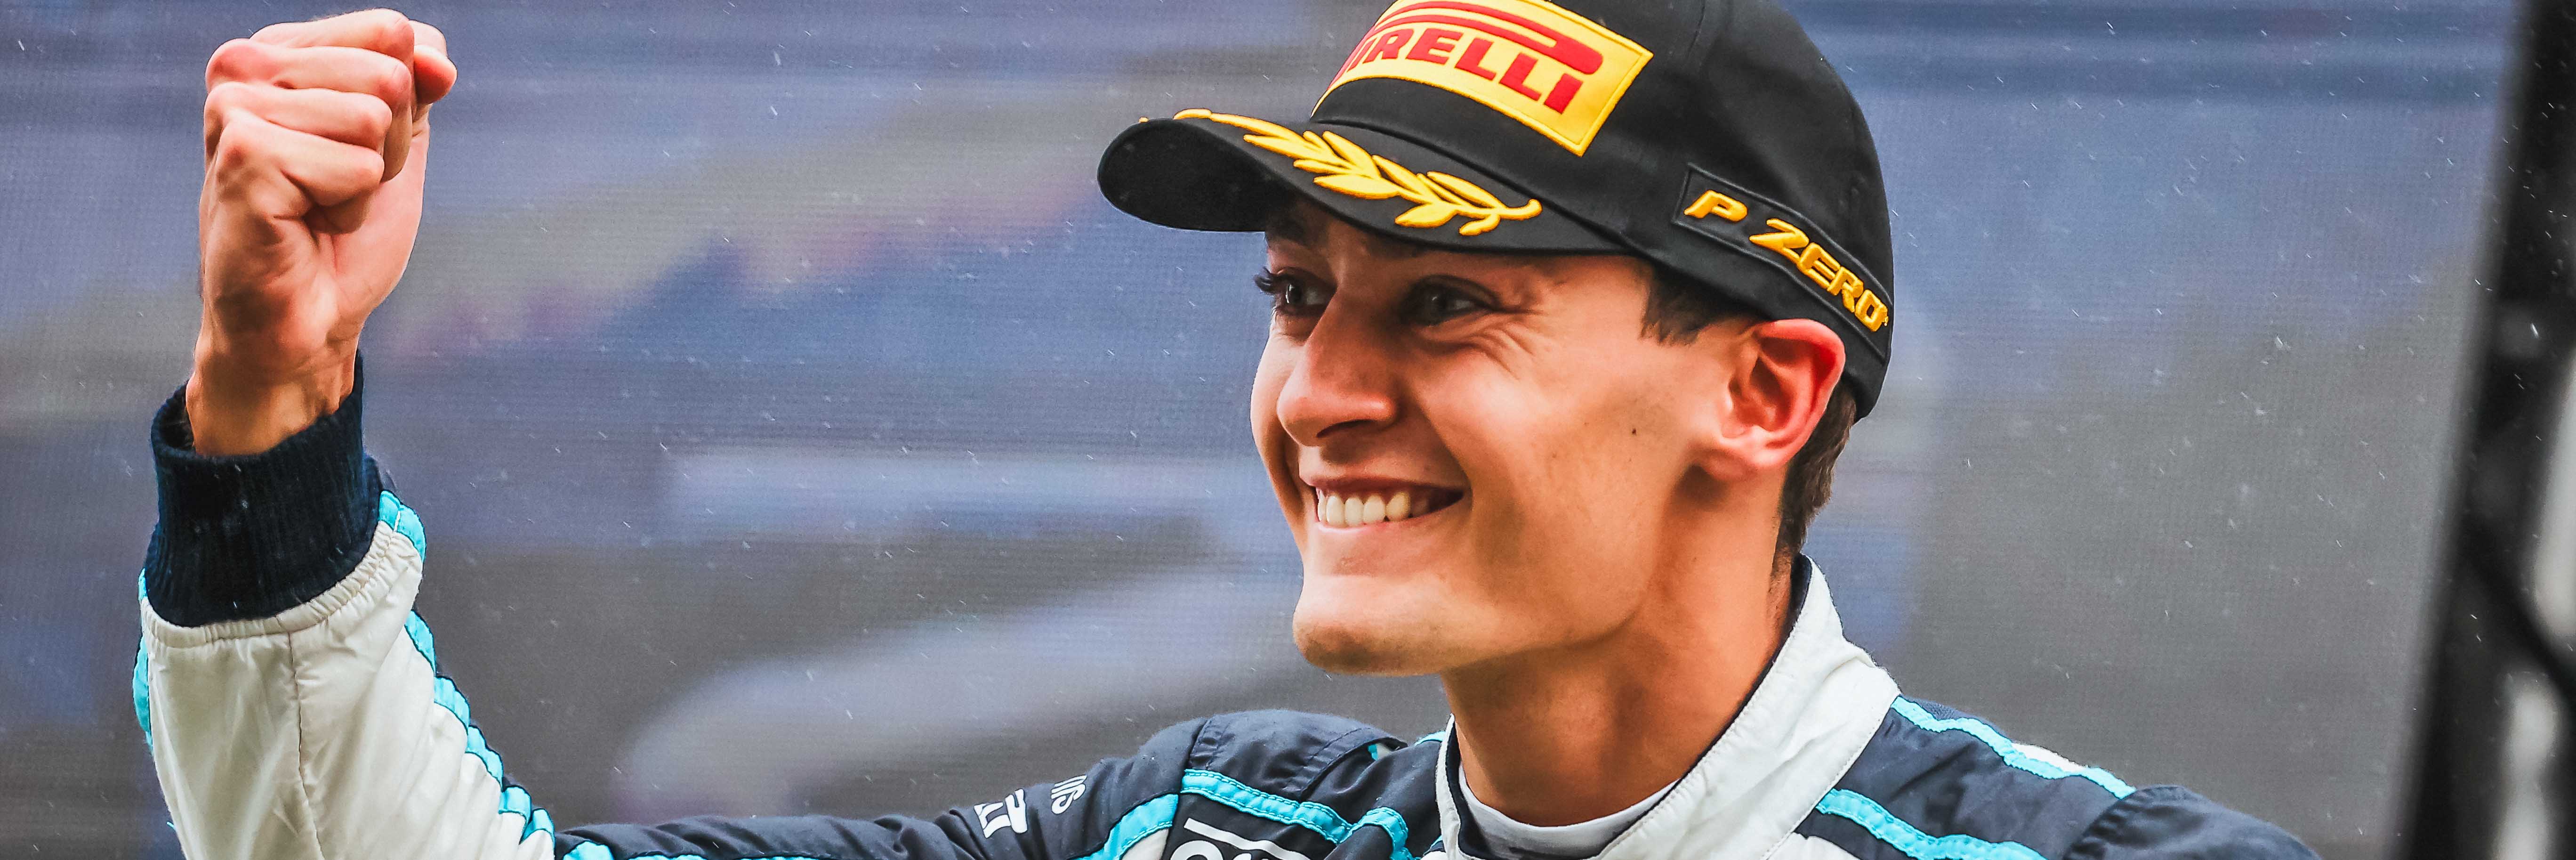 George Russell celebrates after a podium at the 2021 Belgian Grand Prix